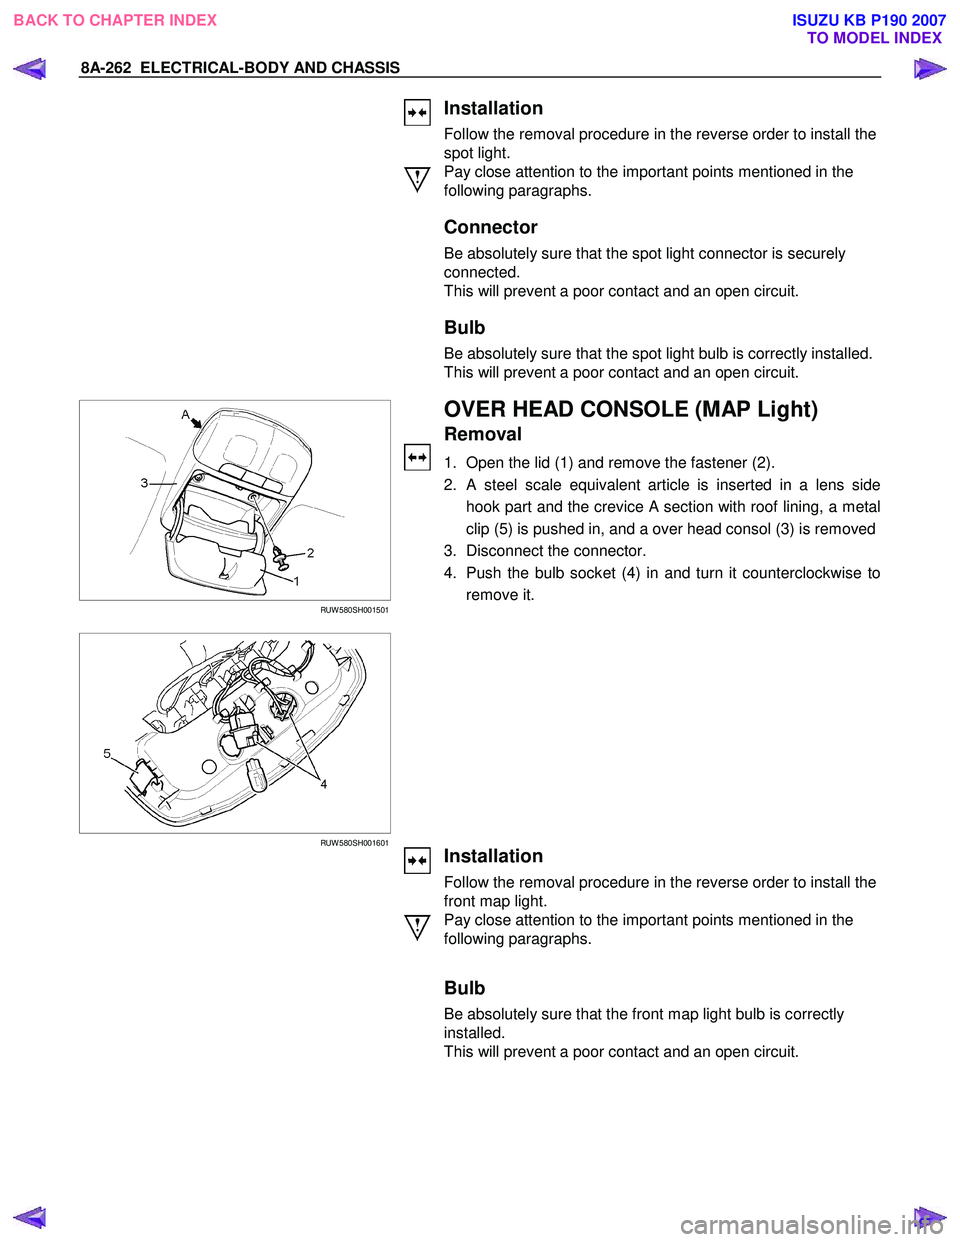 ISUZU KB P190 2007  Workshop Repair Manual 8A-262  ELECTRICAL-BODY AND CHASSIS 
 
  
 
Installation 
Follow the removal procedure in the reverse order to install the 
spot light. 
Pay close attention to the important points mentioned in the 
f